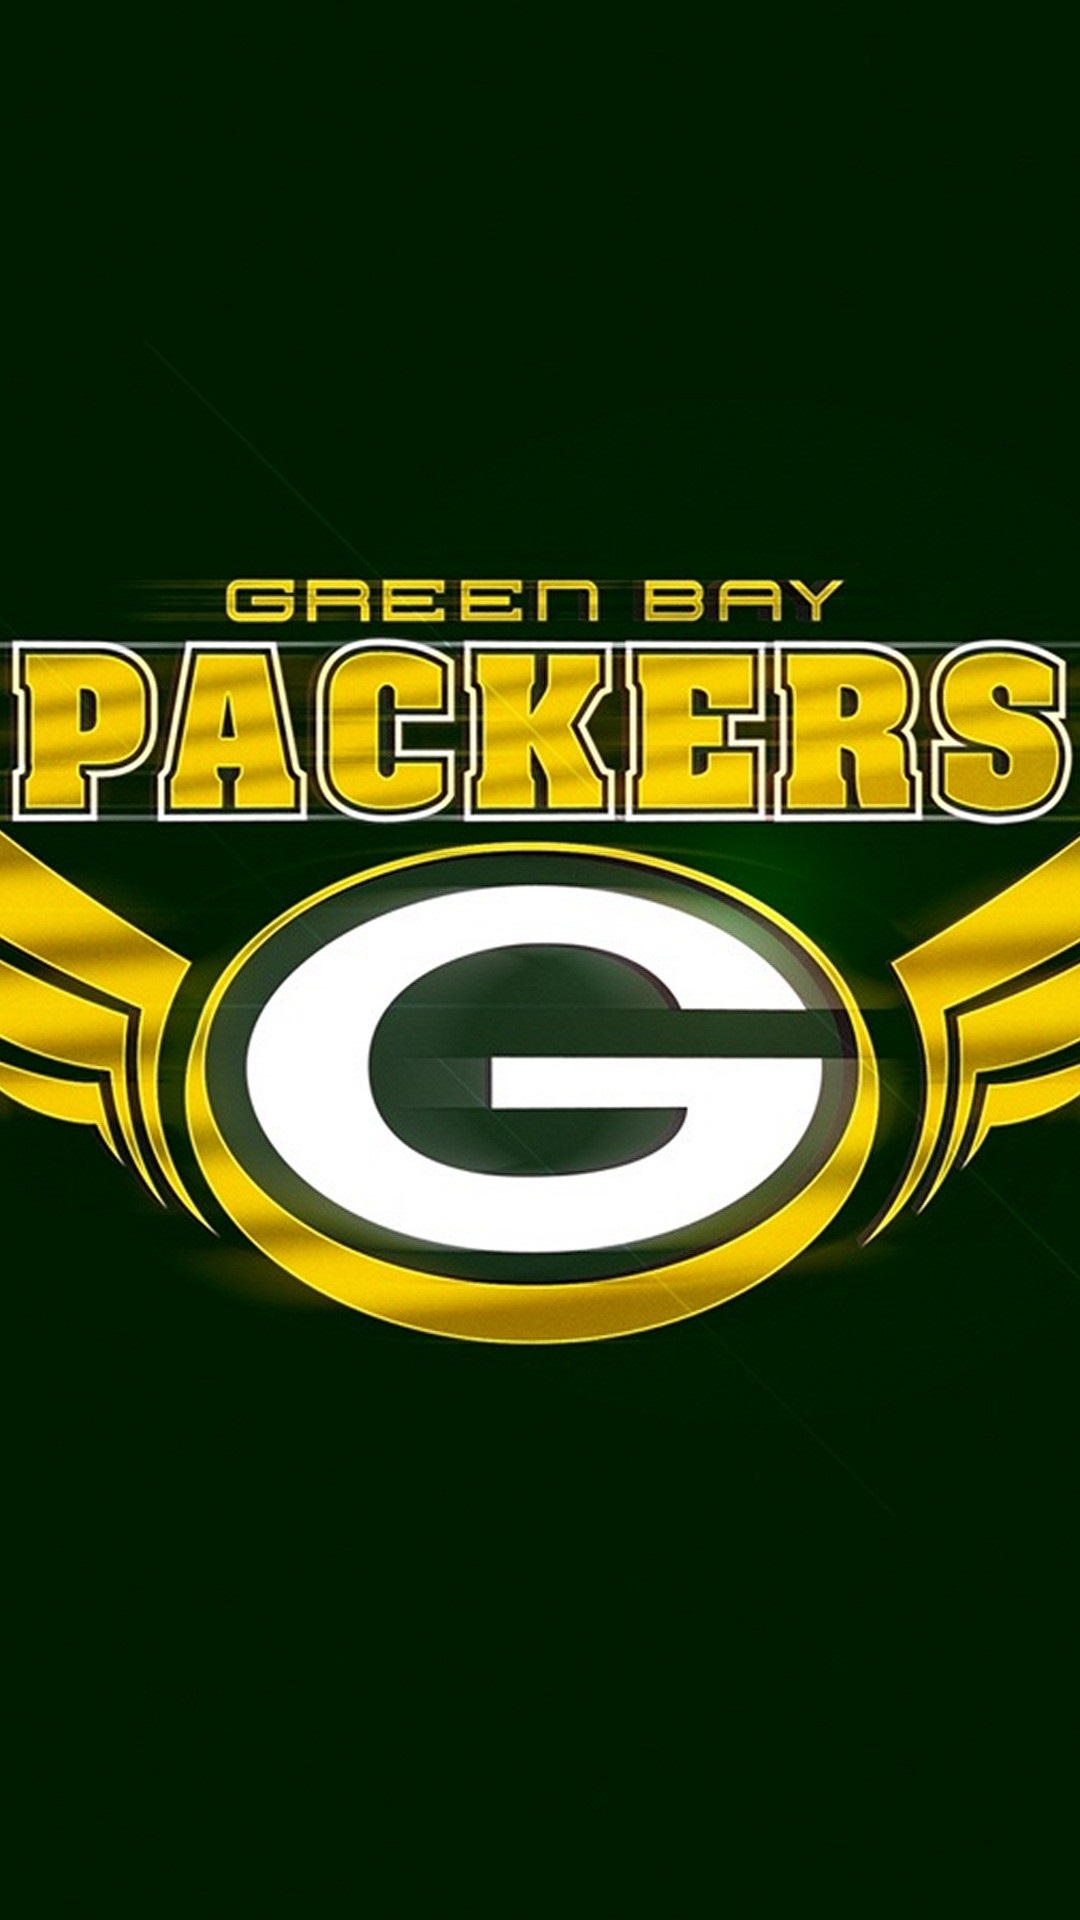 Green Bay Packers NFL iPhone Screensaver with high-resolution 1080x1920 pixel. Donwload and set as wallpaper for your iPhone X, iPhone XS home screen backgrounds, XS Max, XR, iPhone8 lock screen wallpaper, iPhone 7, 6, SE and other mobile devices